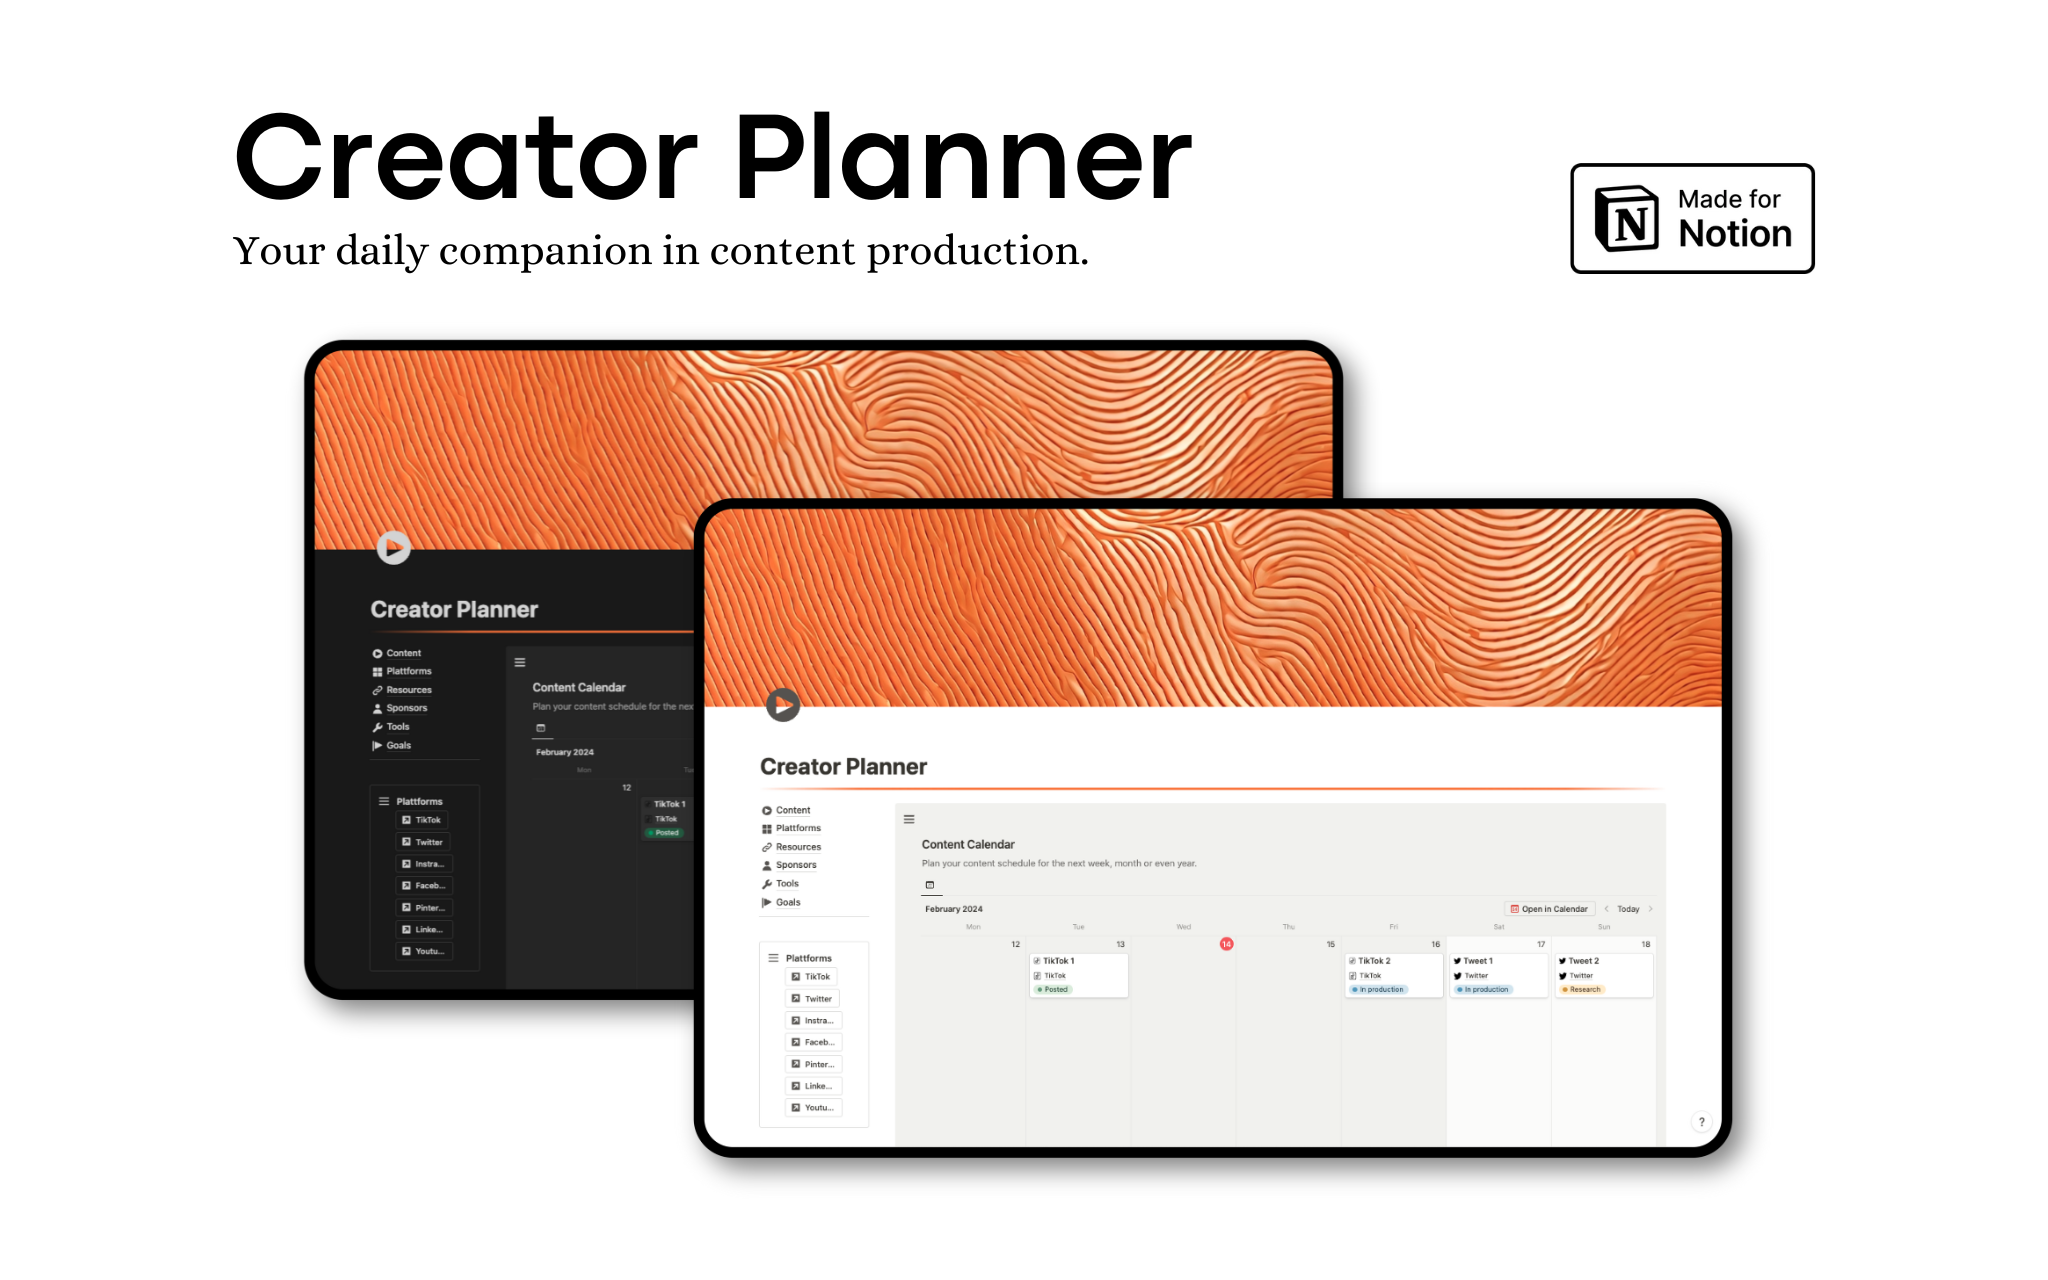 Overview content ideation and production, start planning your creator goals and manage resources.